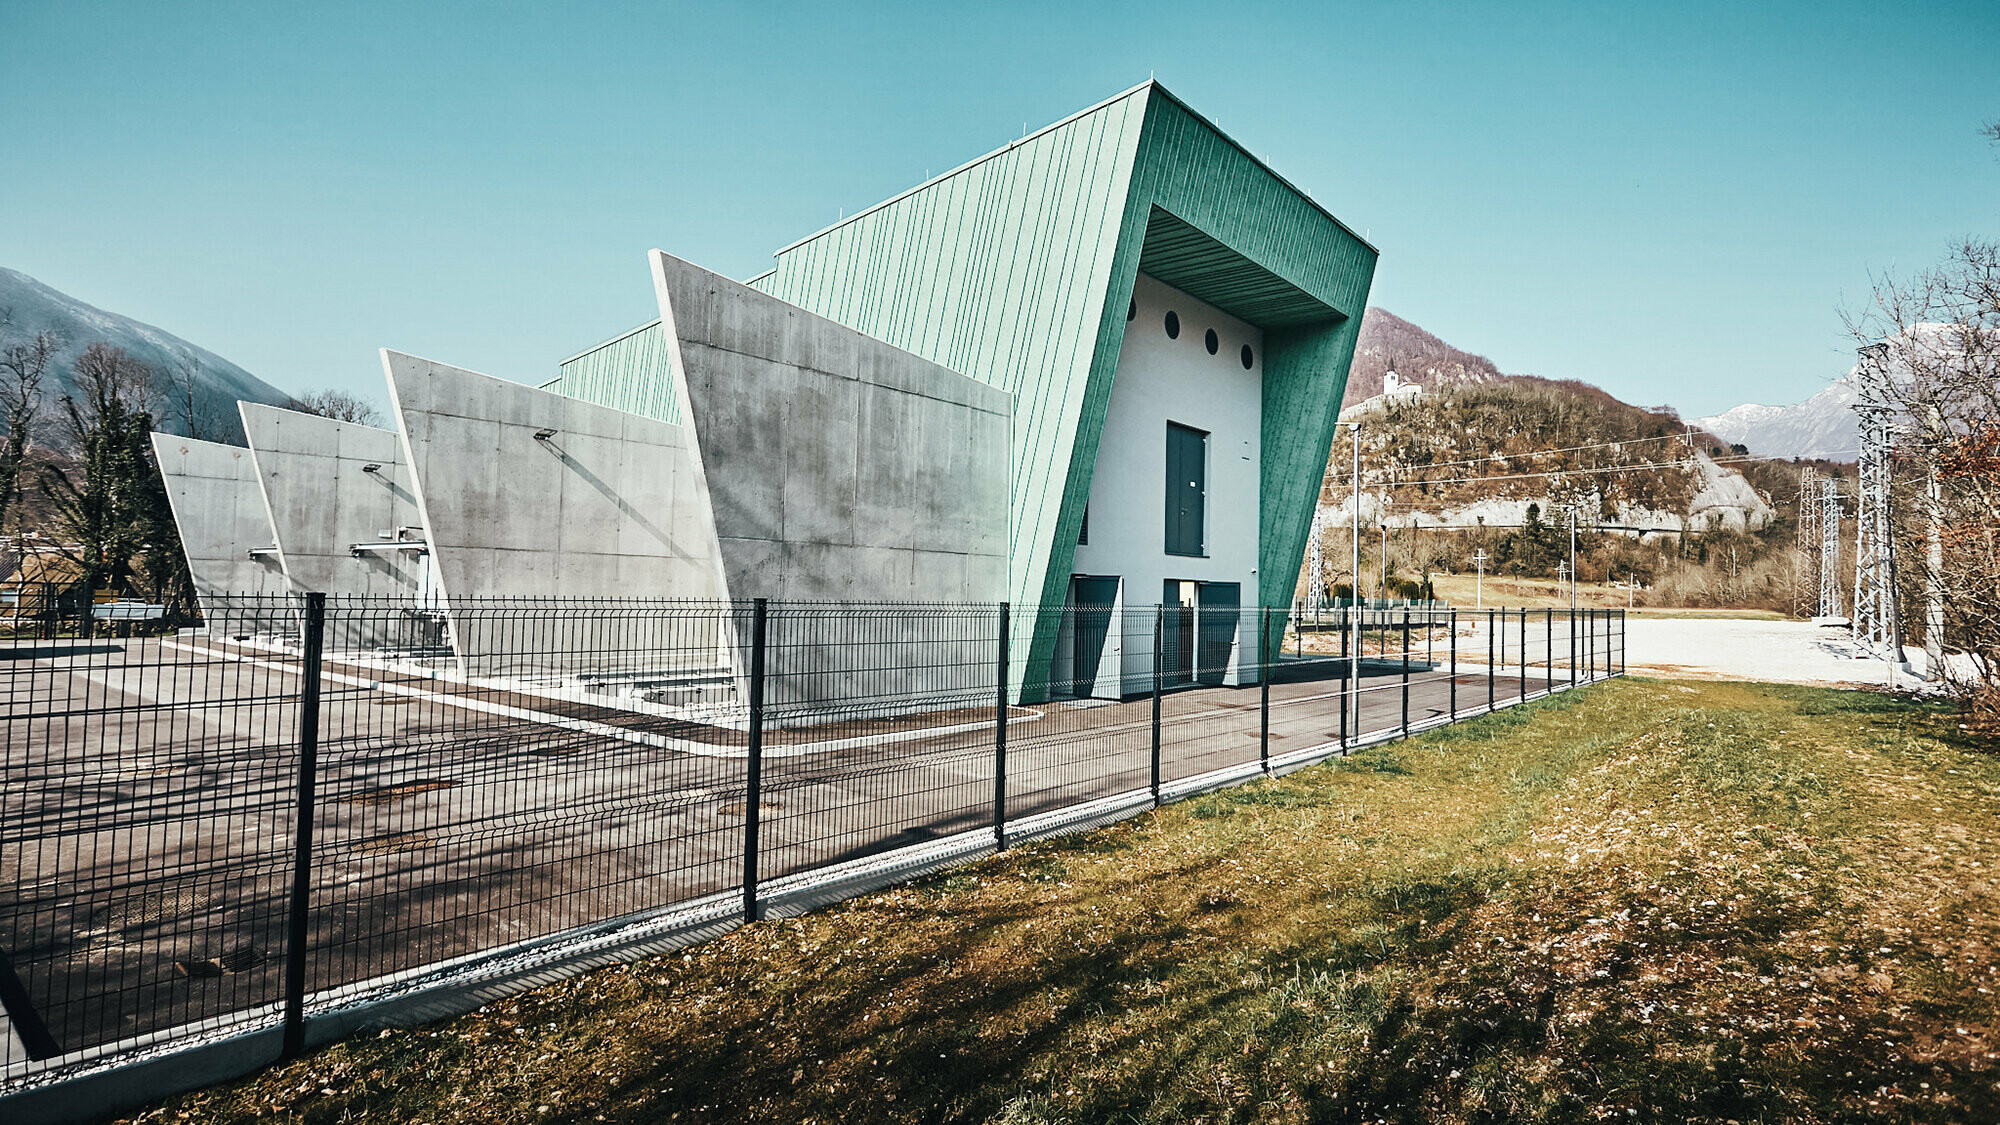 Lateral view of the substation including front and concrete partitions, fenced and with mountains in the background.